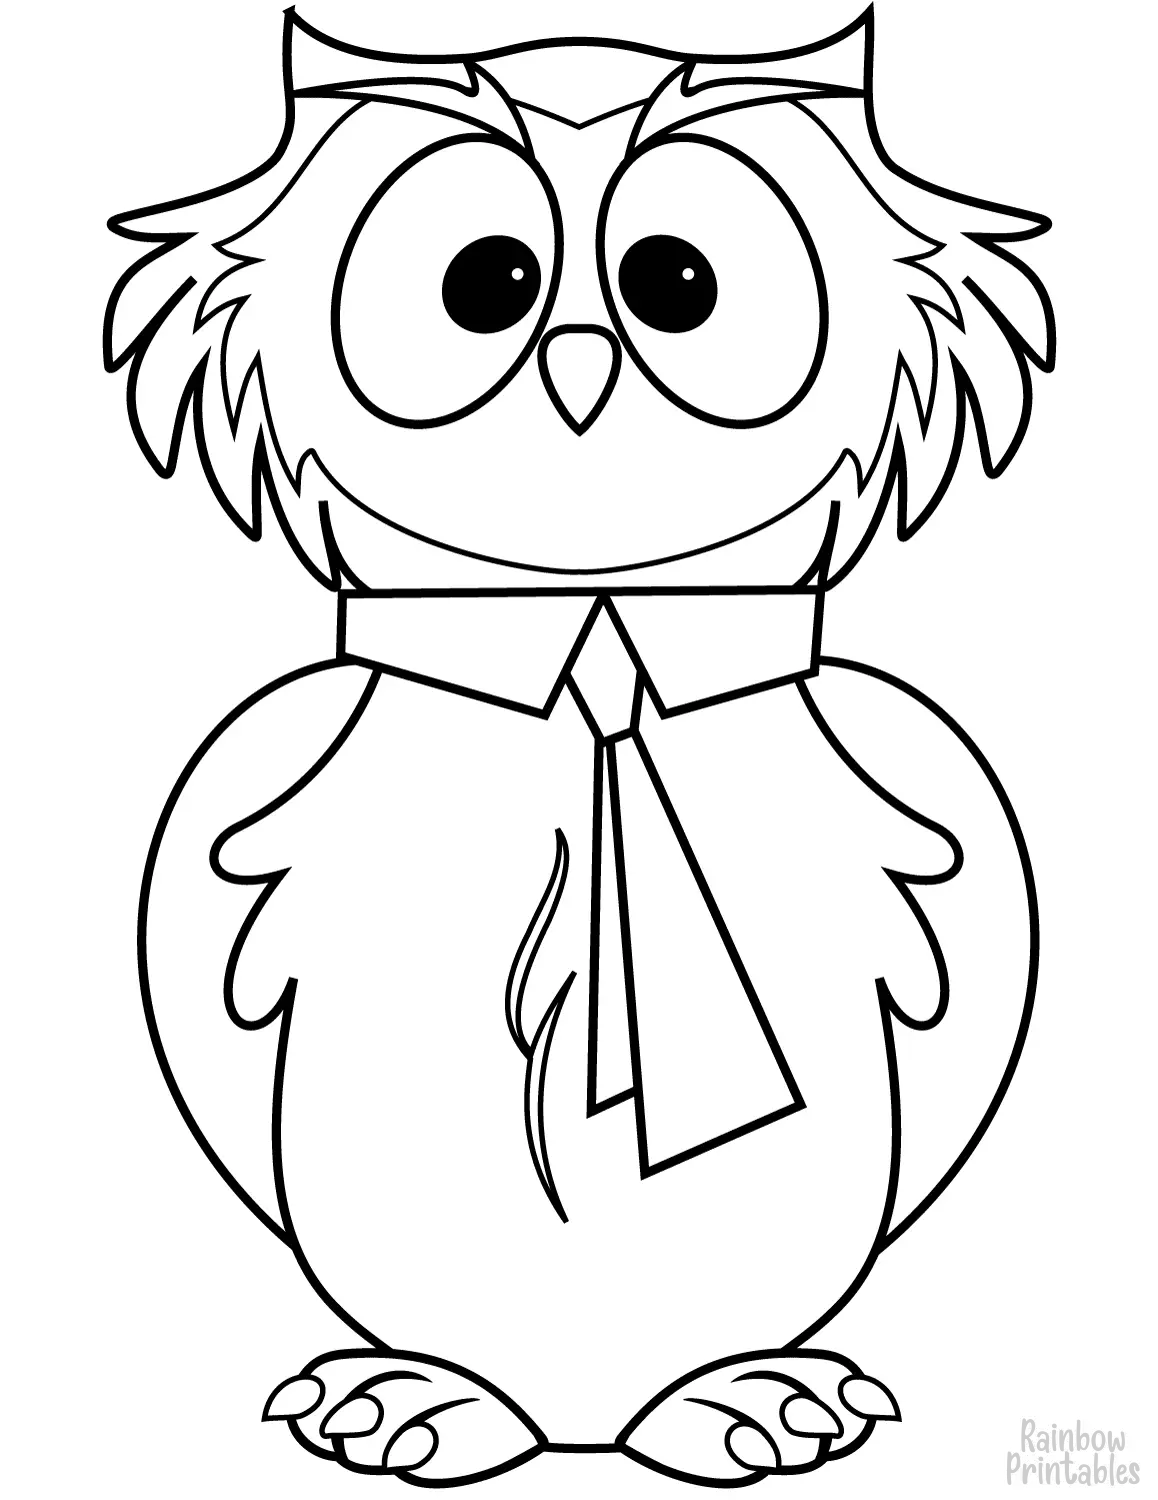 Smart-professor-cute-for-kids-drawing-cartoon-owl-coloring-page